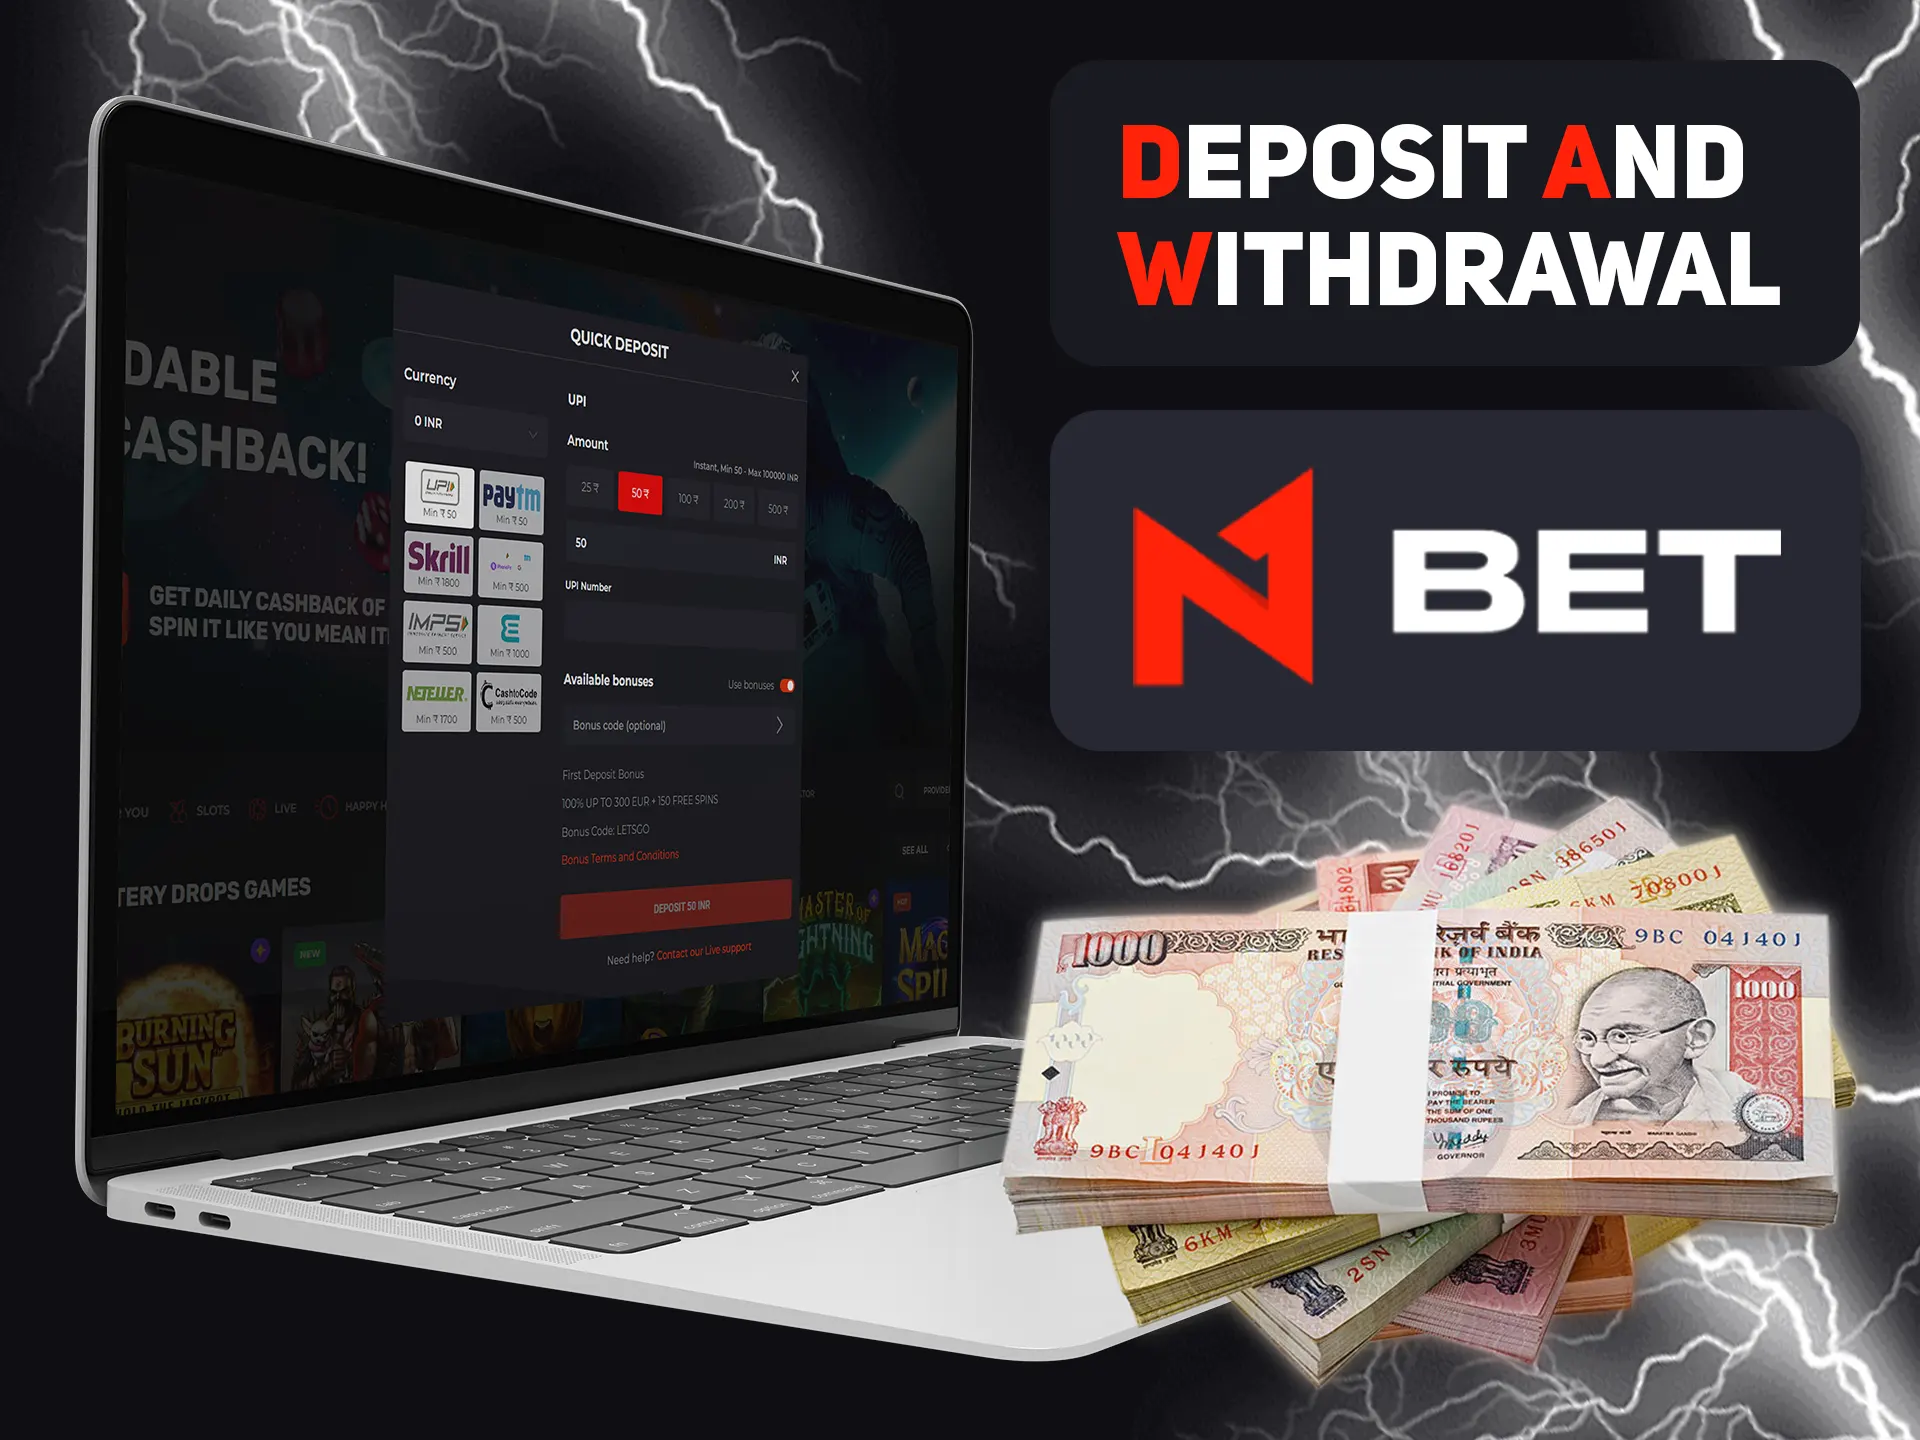 Deposit and withdraw money without problems at N1bet.